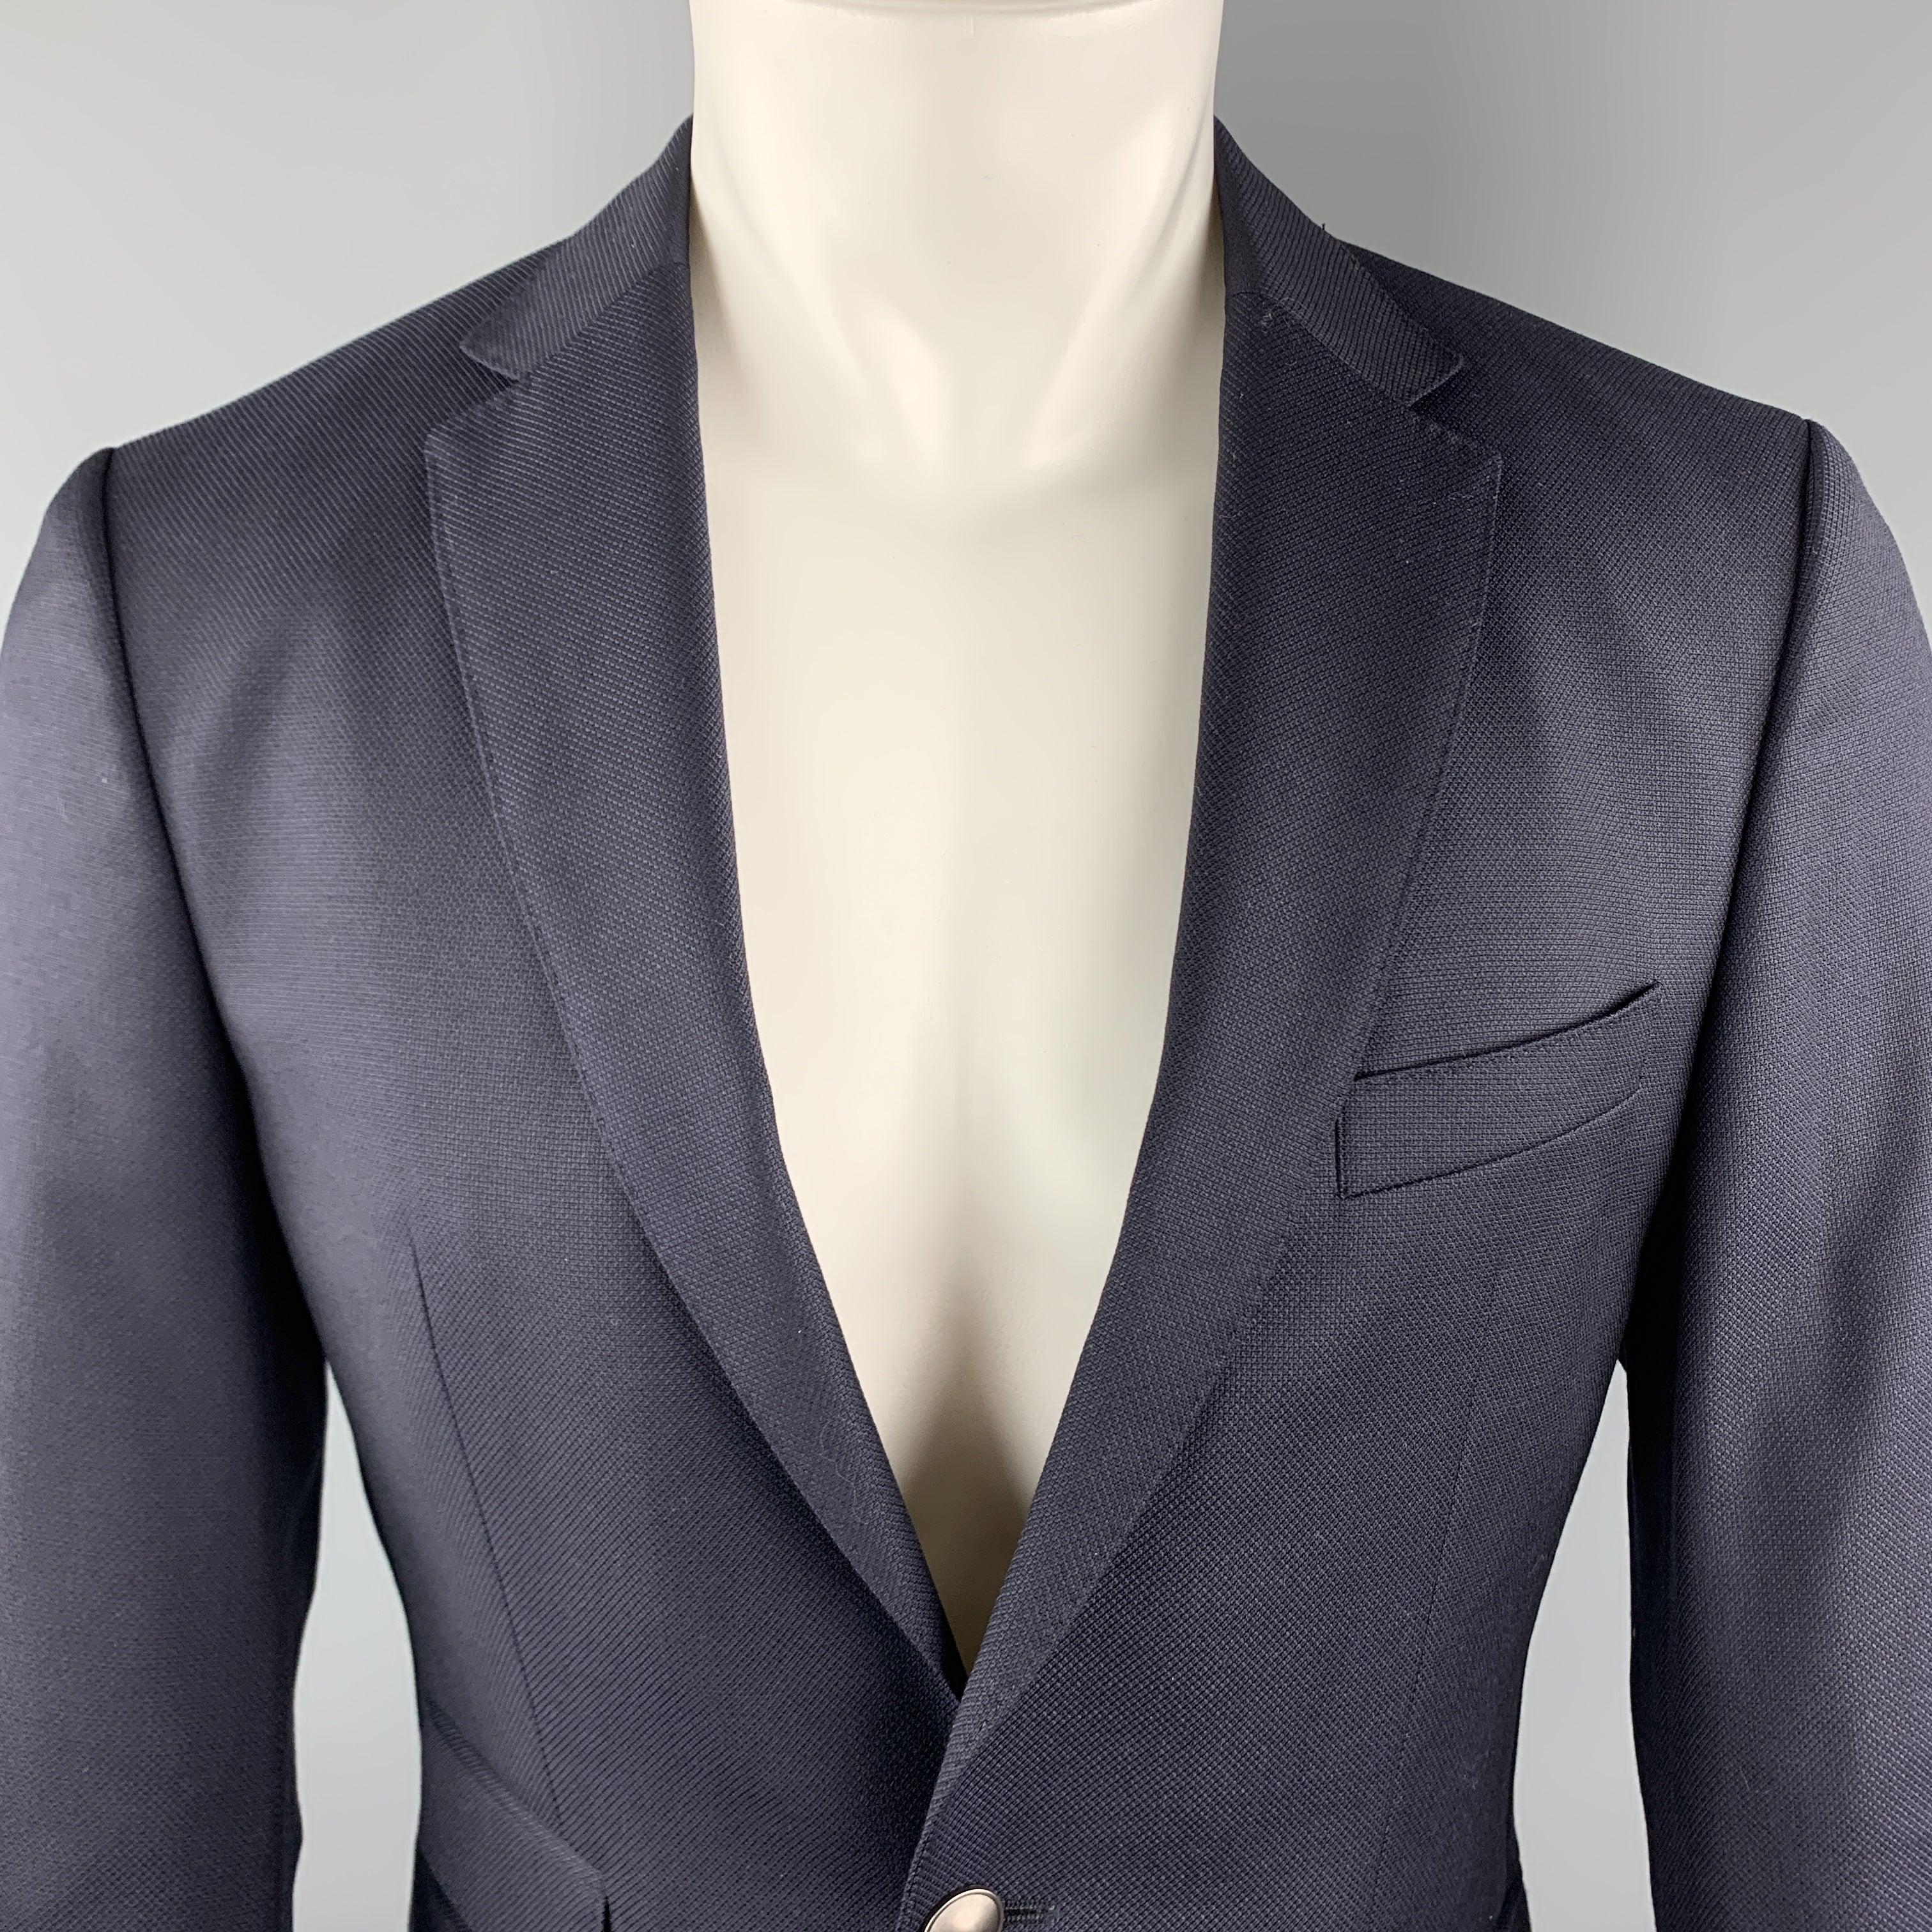 HUGO BOSS Sport Coat comes in a navy woven wool featuring a notch lapel style, flap pockets, and a two button closure.
Excellent
Pre-Owned Condition. 

Marked:   46 

Measurements: 
 
Shoulder: 17 inches 
Chest: 36 inches 
Sleeve: 25 inches